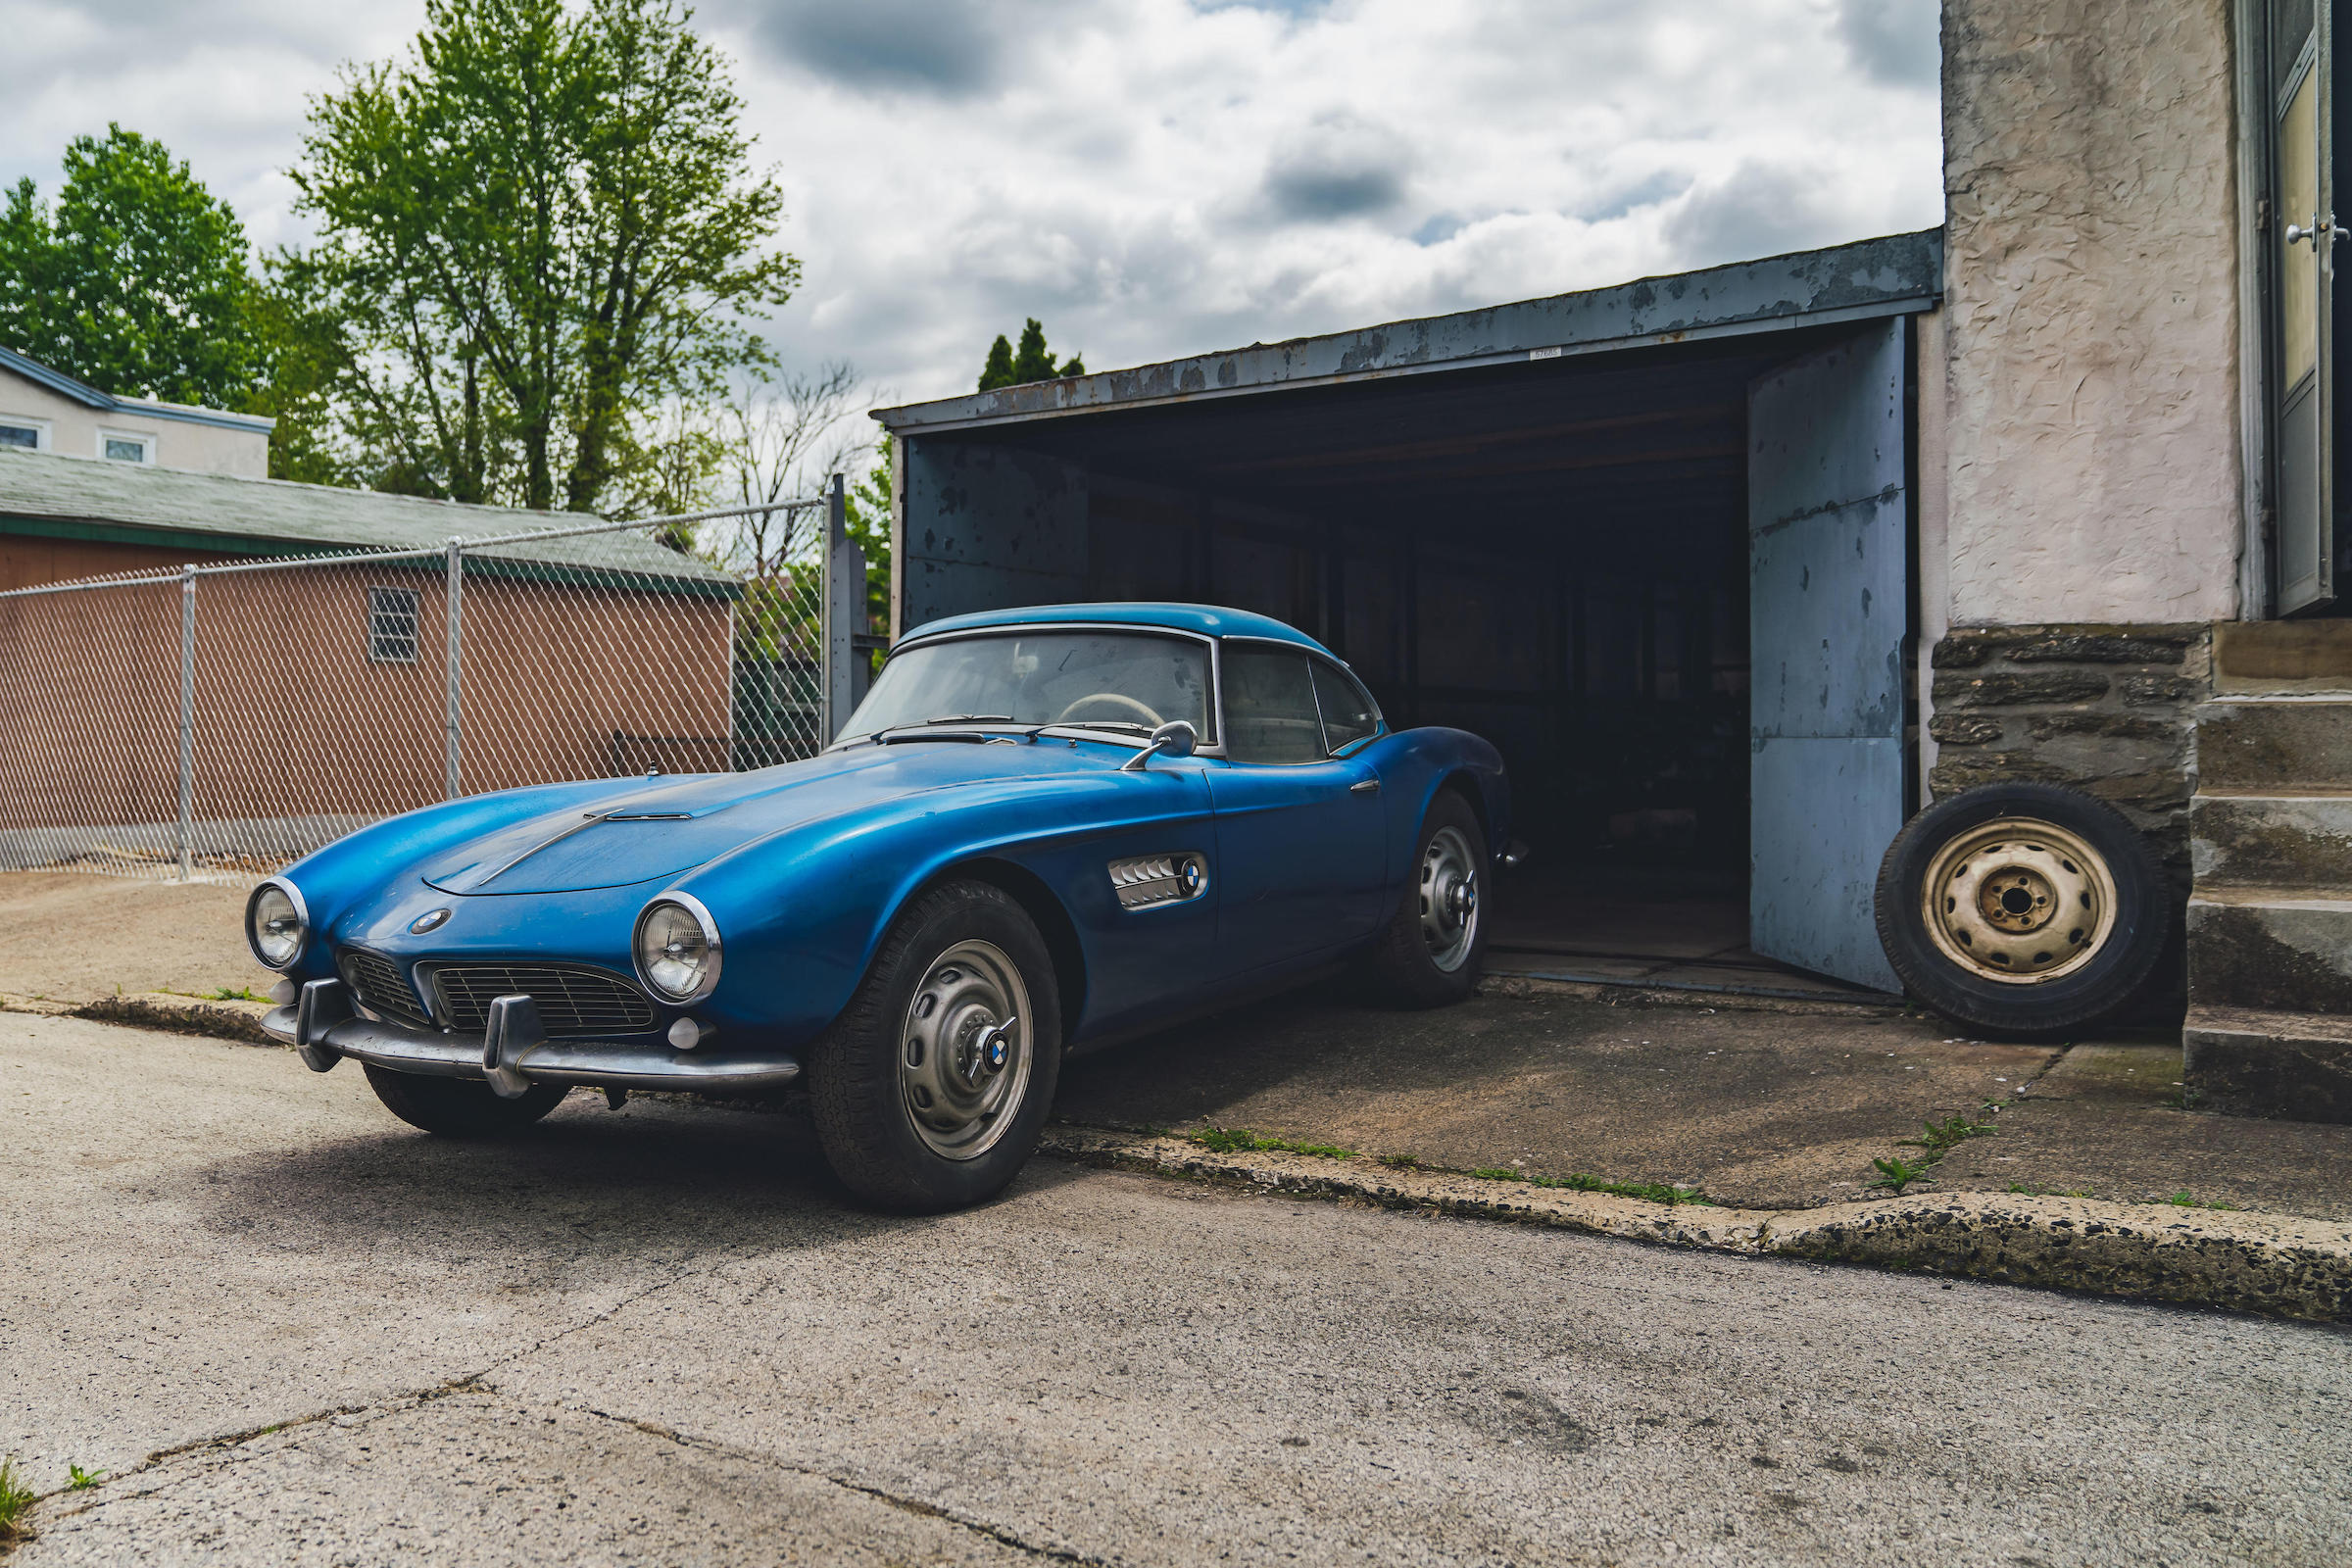 A hidden BMW 507 is coming to market for the first time since 1979